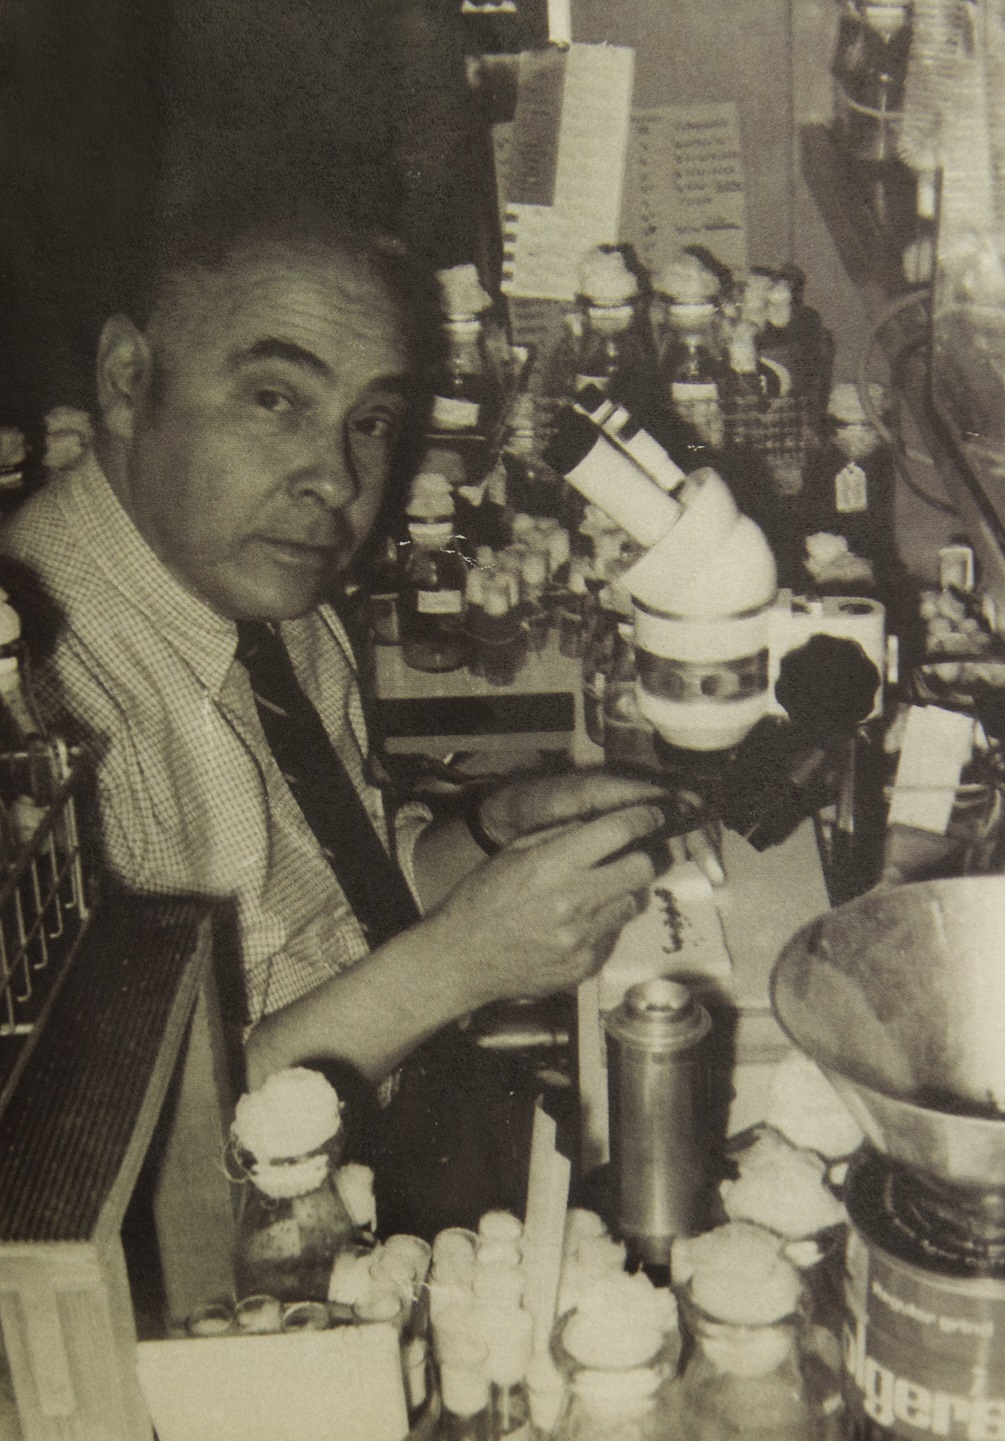 The lab bench was a favorite spot of Mel's, as evidenced by this photo of him taken in January 1967. Courtesy photo